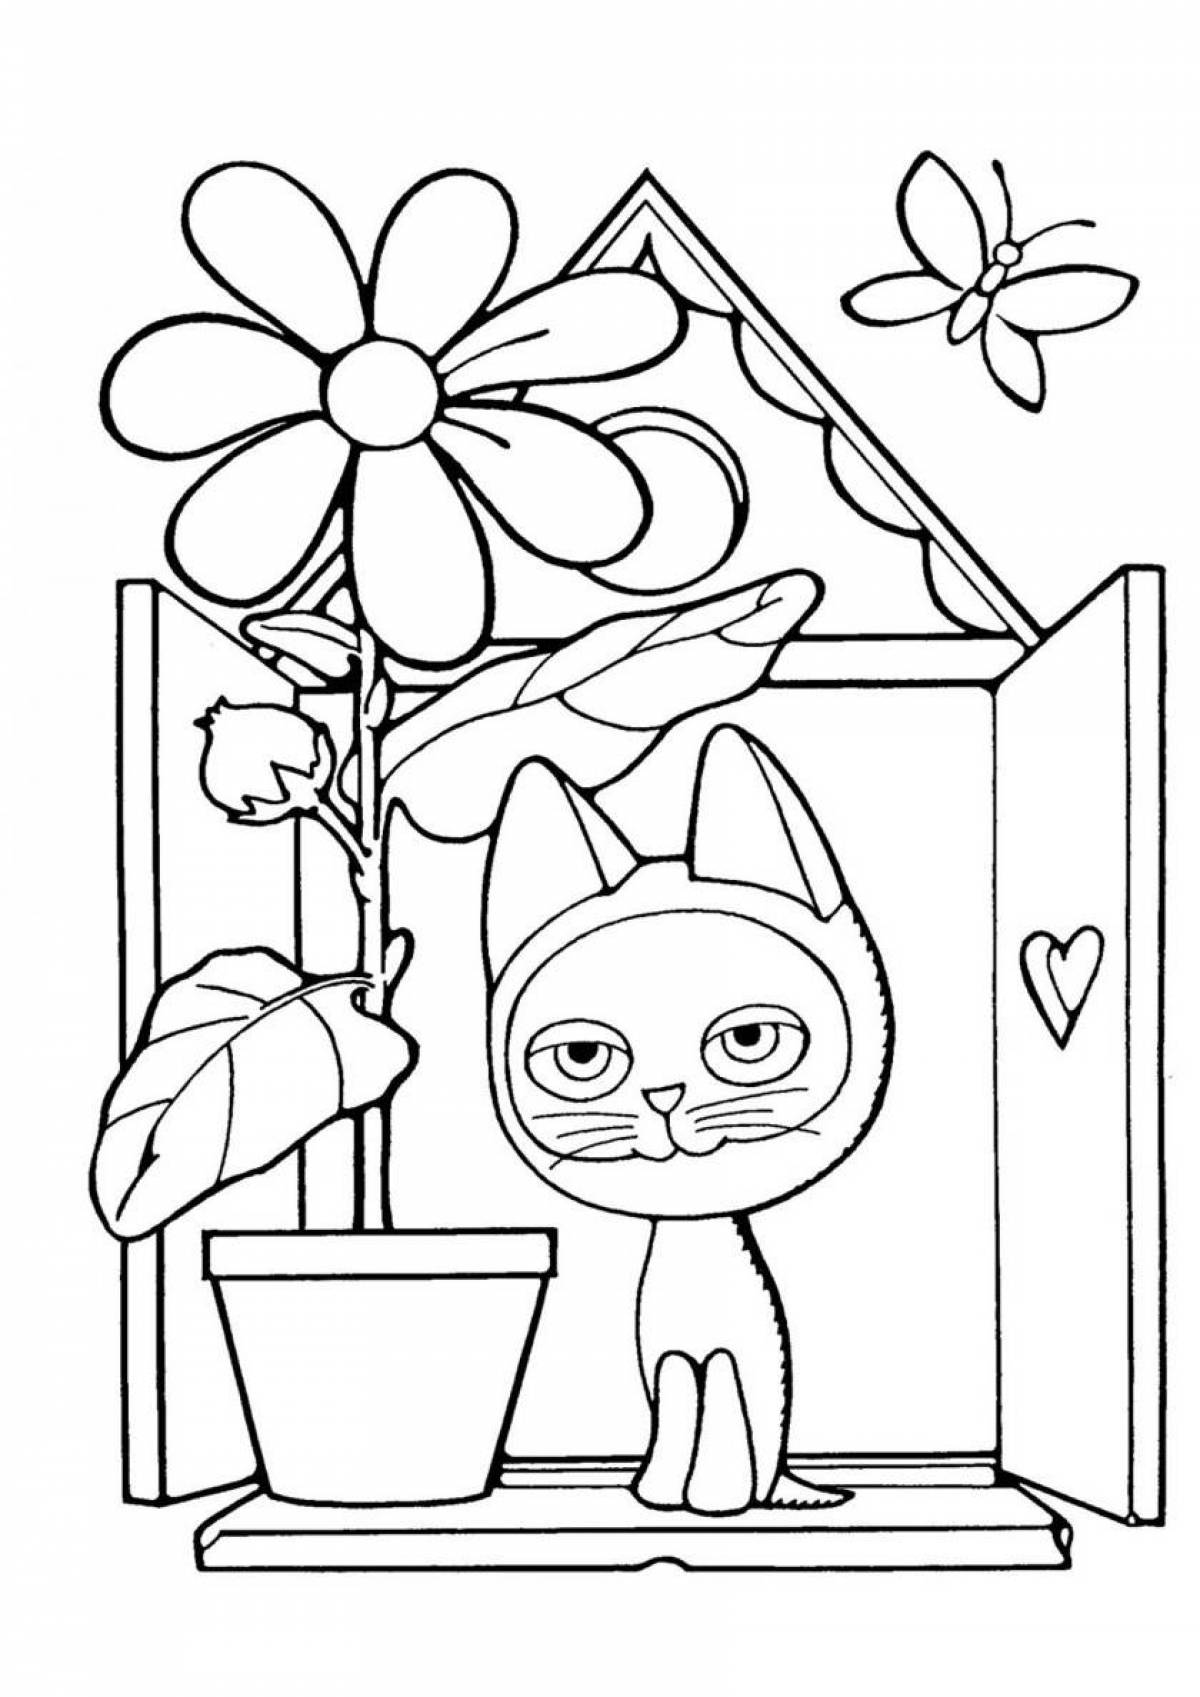 Funny kitten coloring book